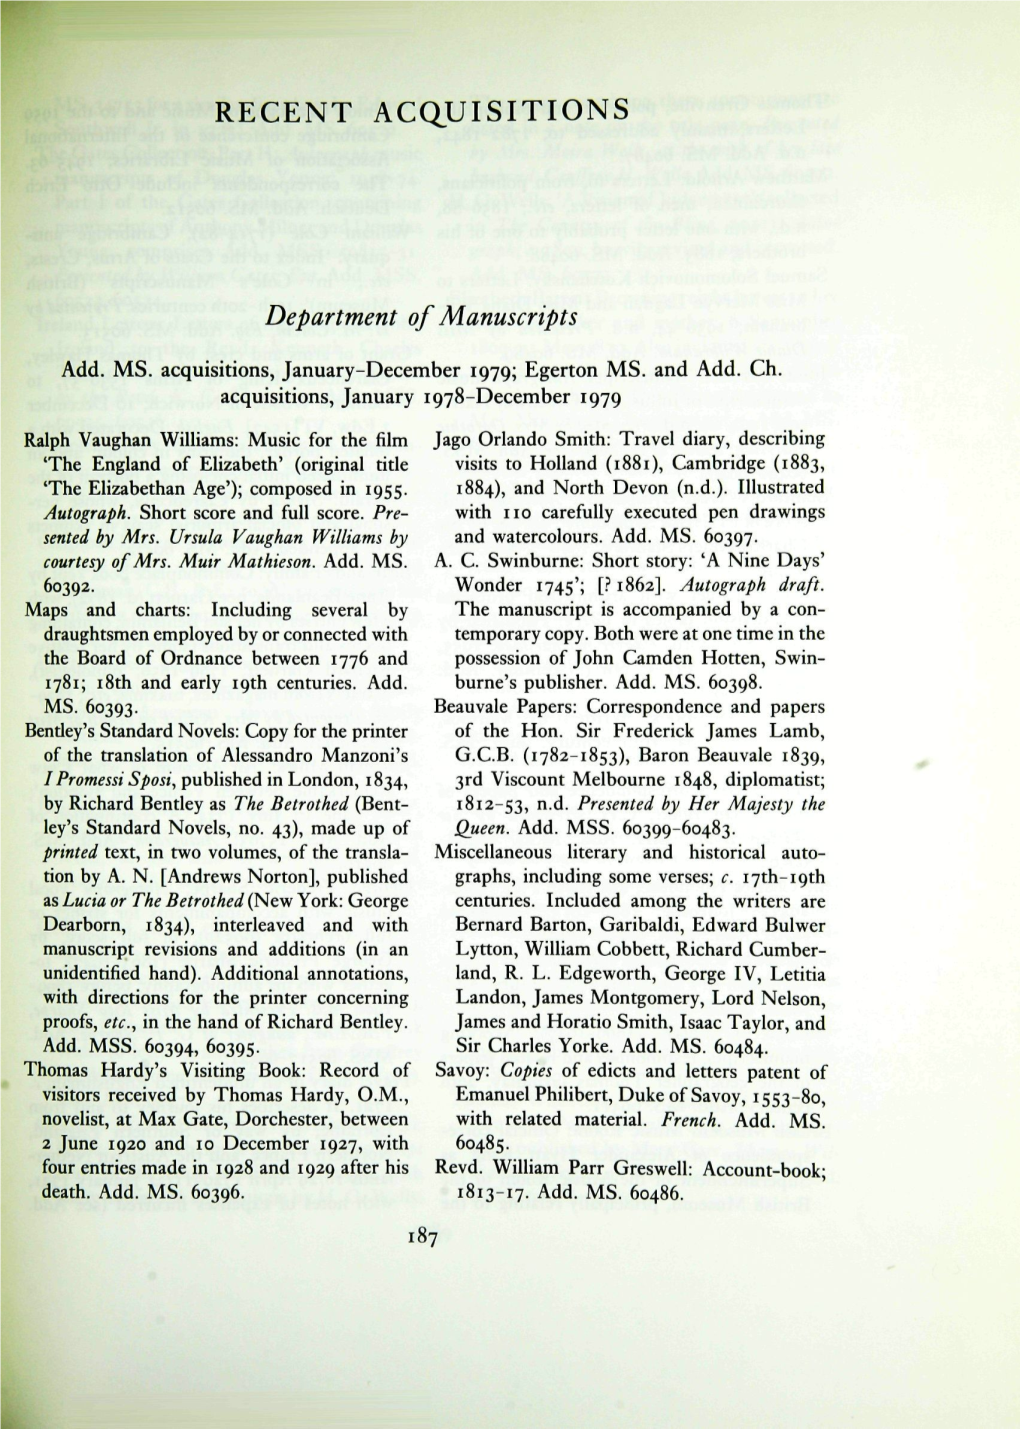 Department of Manuscripts: Add. MS. Acquisitions, January-December 1979